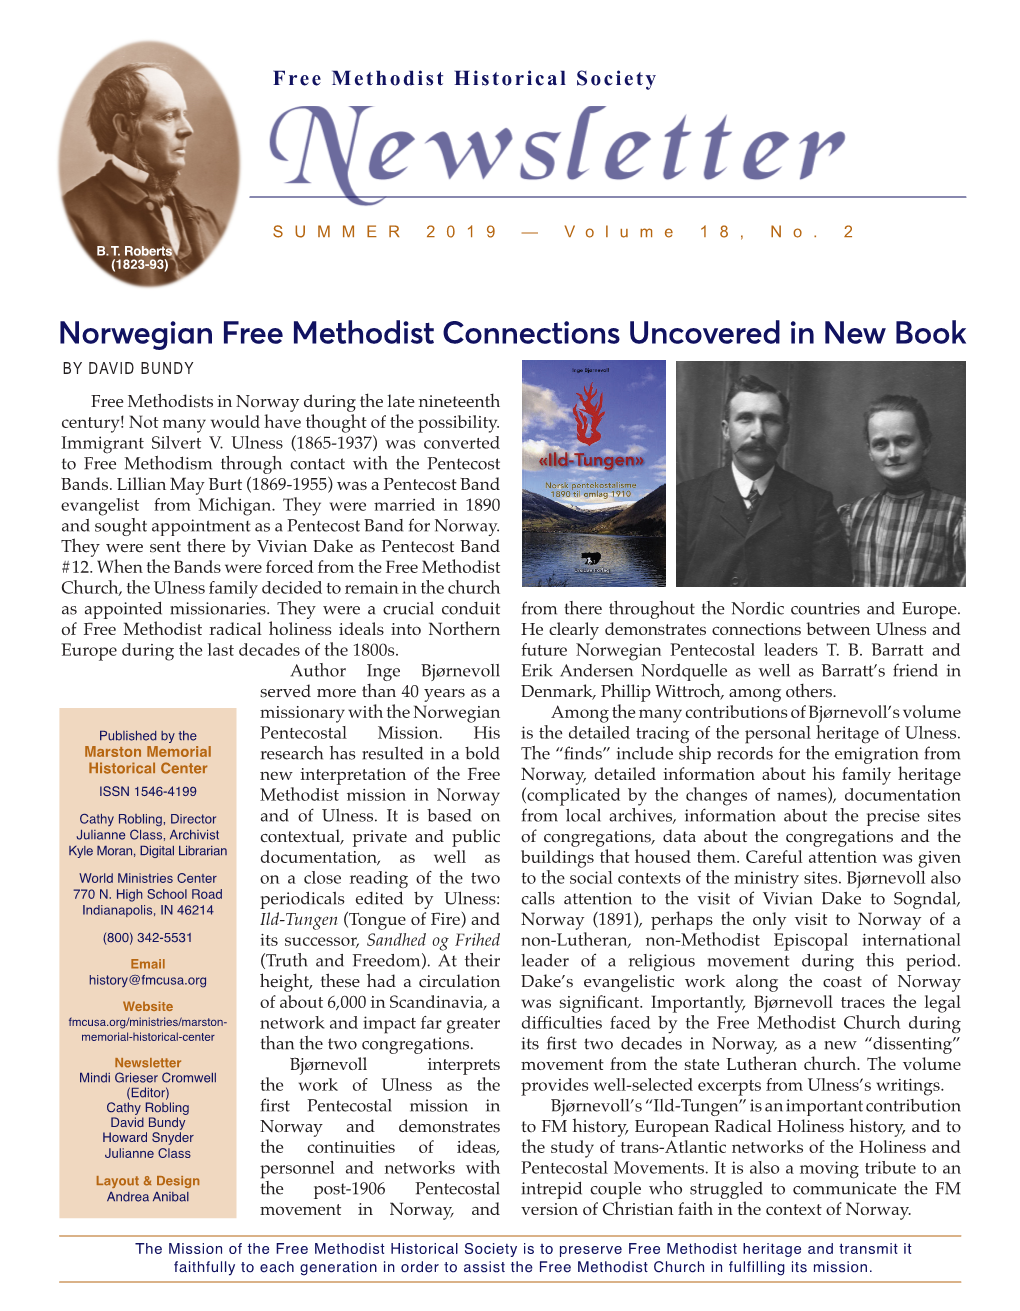 Norwegian Free Methodist Connections Uncovered in New Book for a Gift of $1,700 We Will Name an Entire New Levels Won’T Start Until 2020